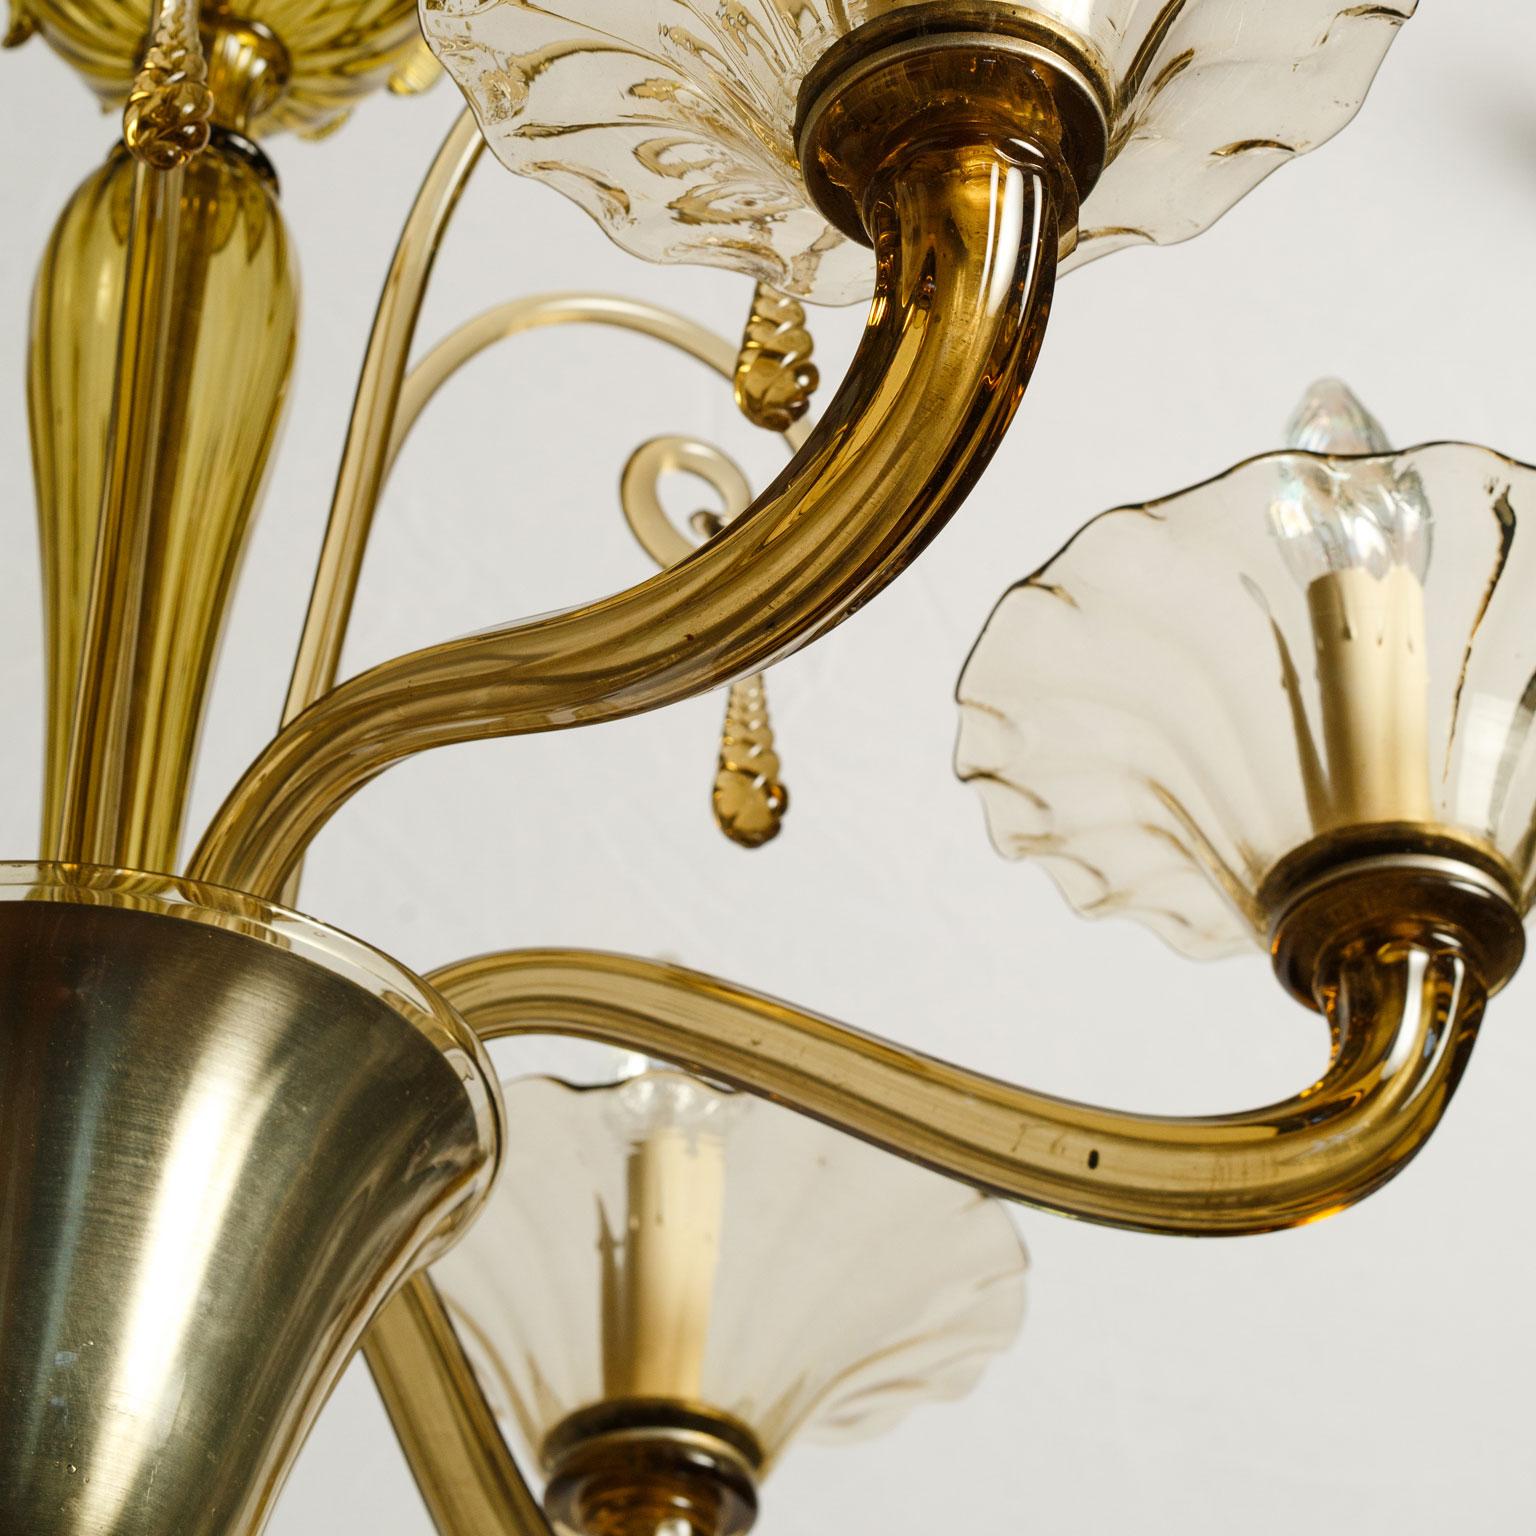 Other Large Hand-Blown Glass Italian Venetian Chandelier in Classic Murano Style